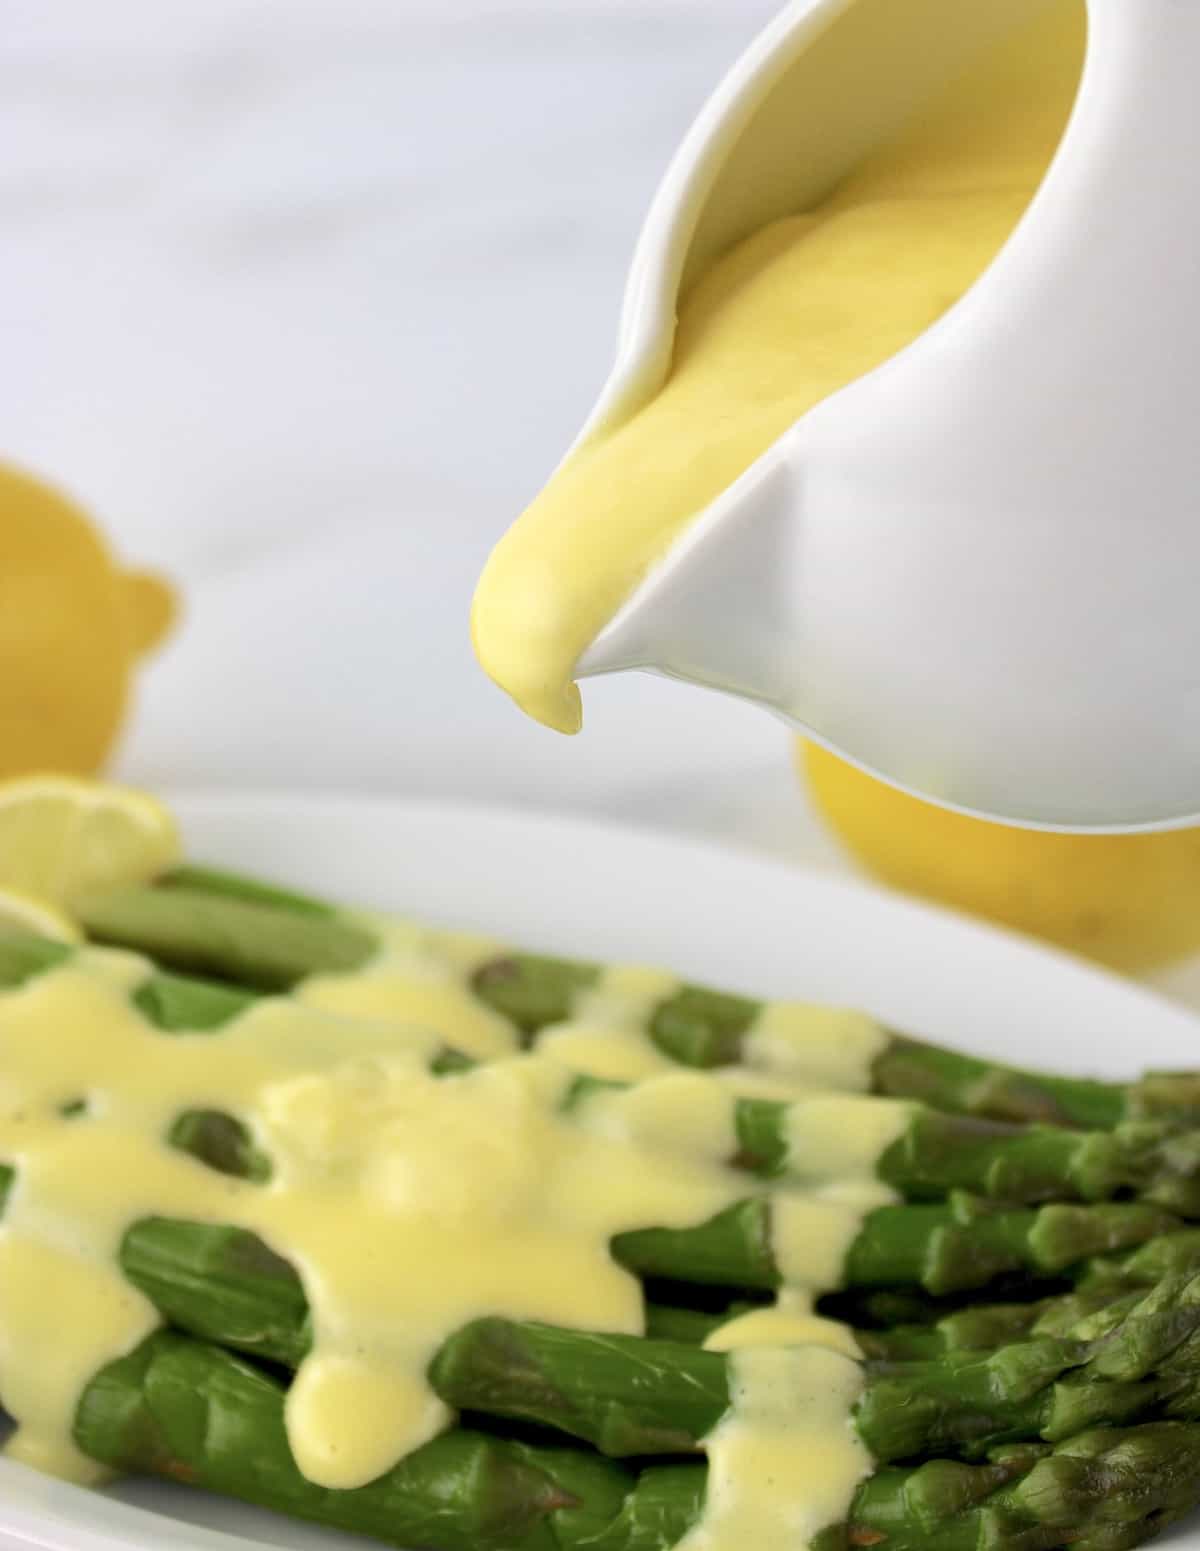 Hollandaise Sauce being poured onto asparagus in white plate